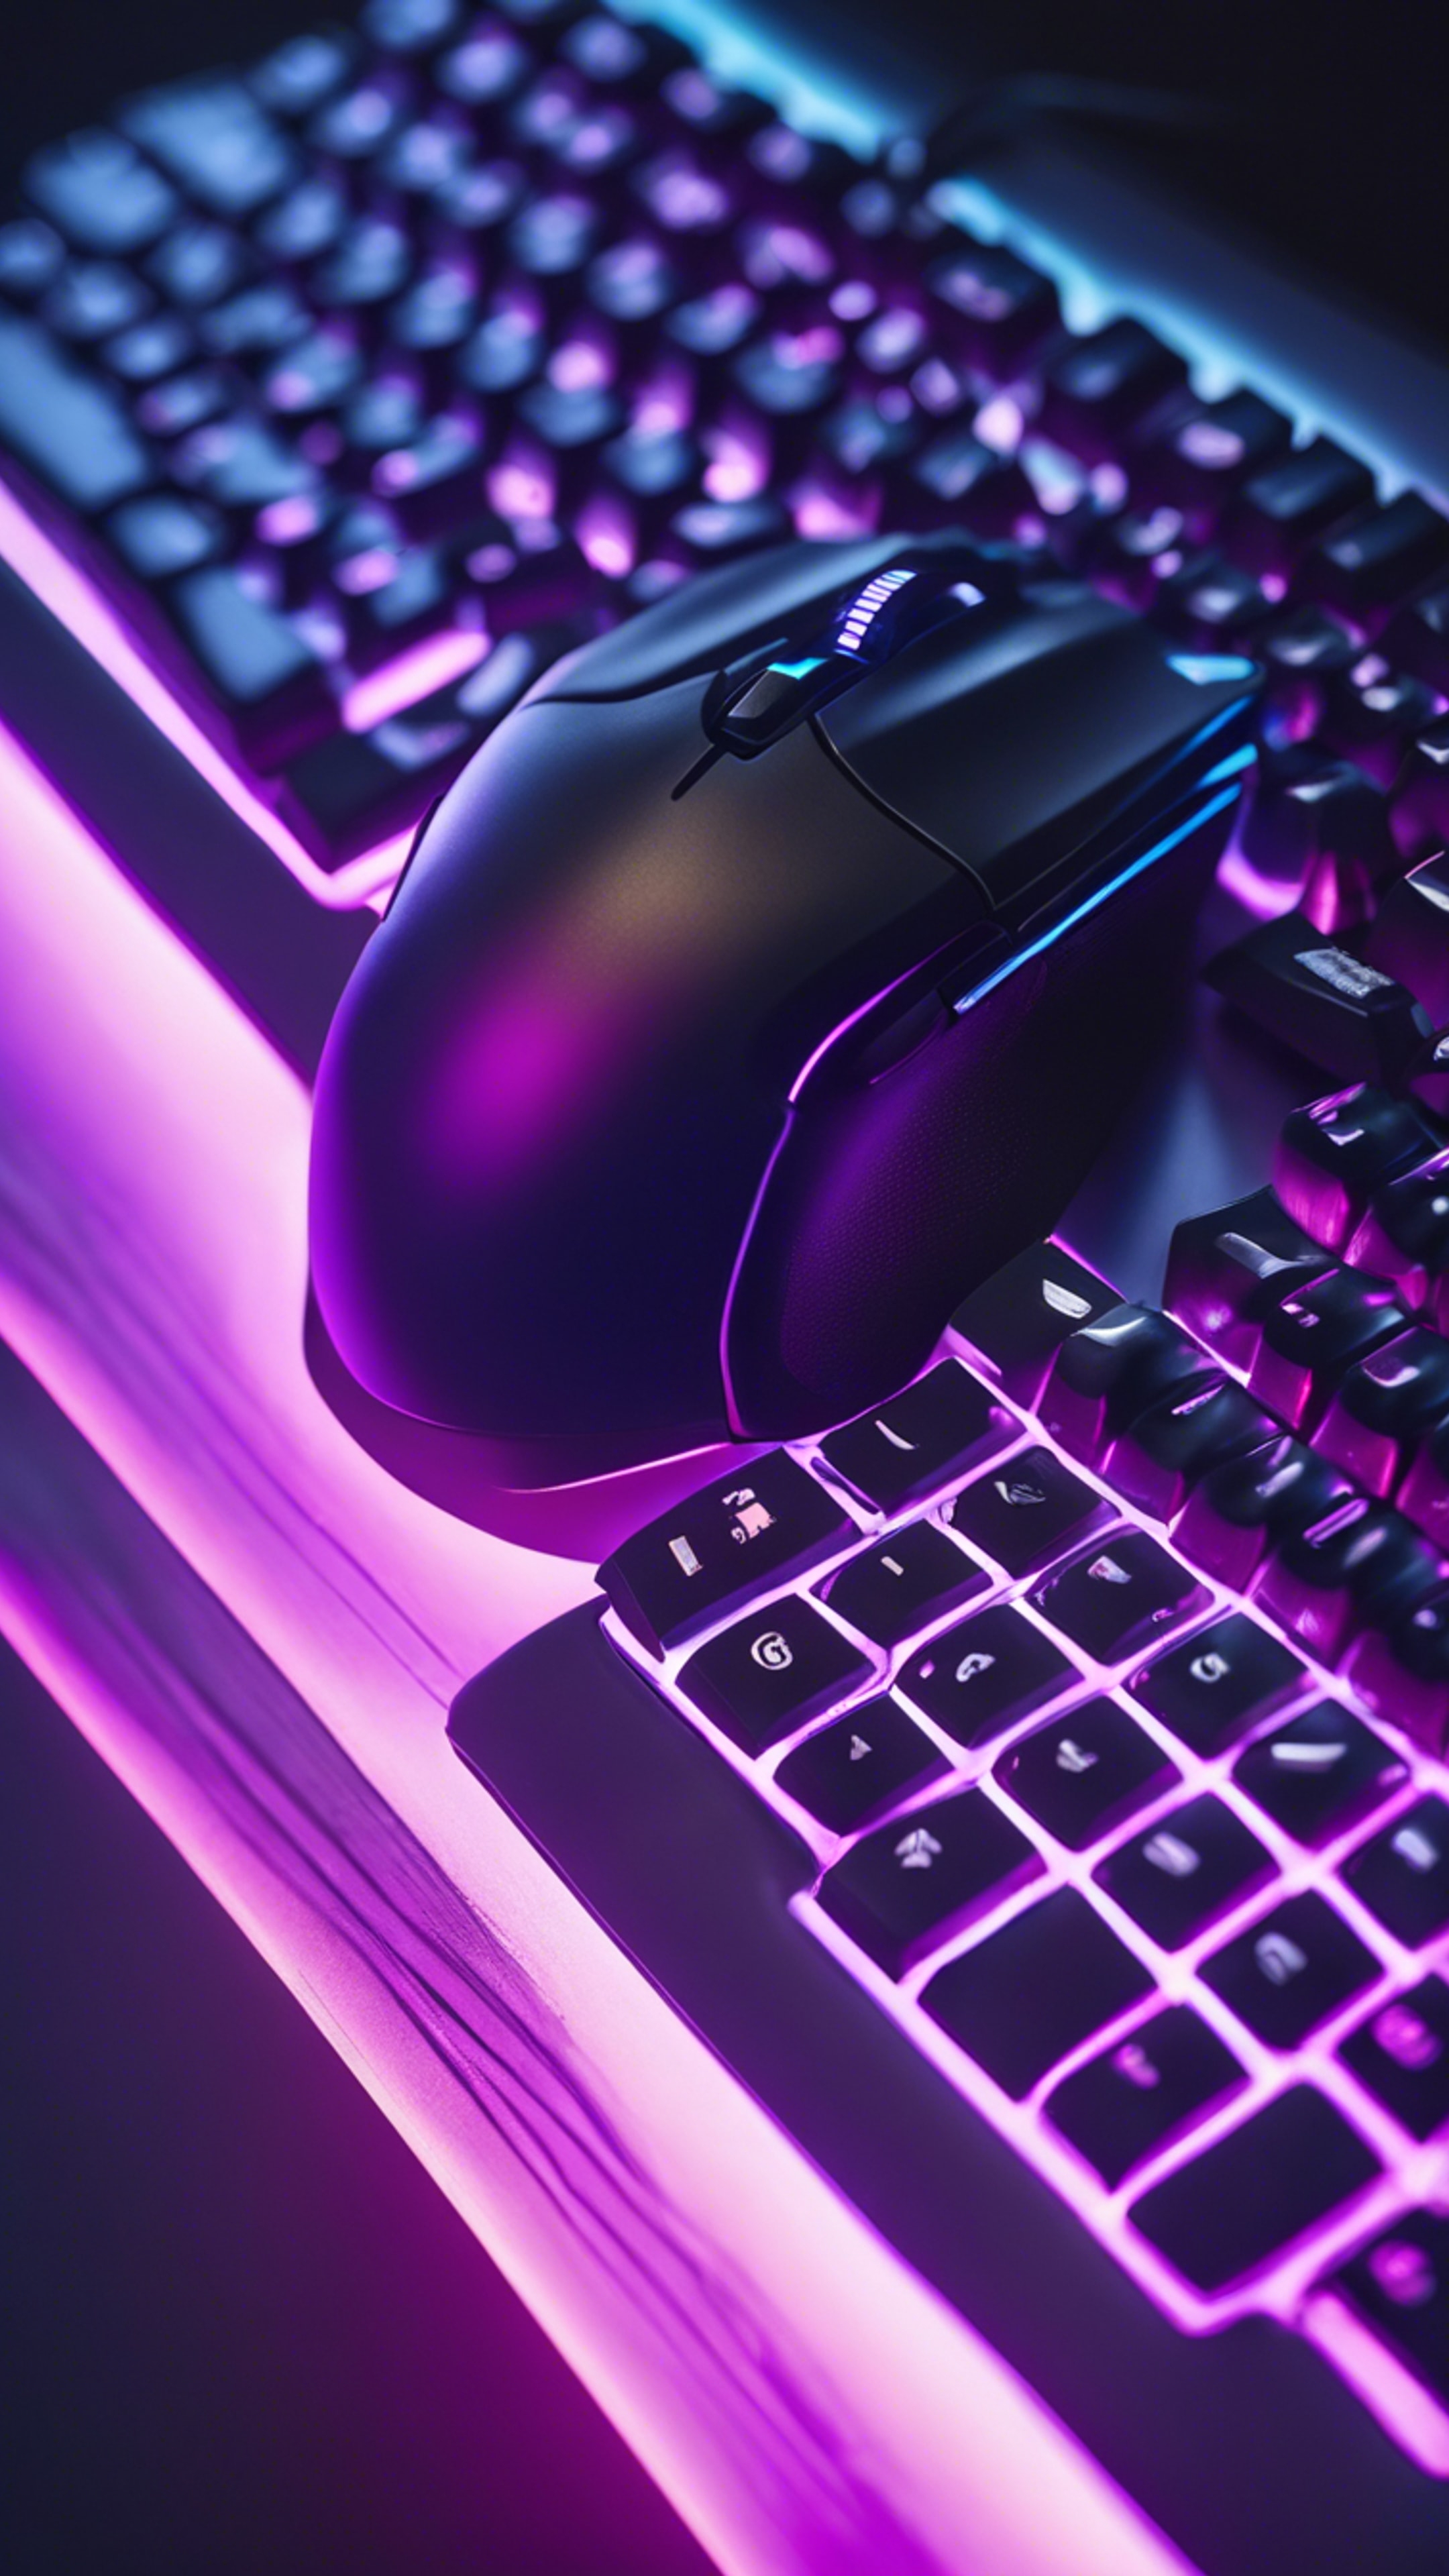 A top down view of a gaming keyboard and mouse bathed in a soothing gradient of blue to purple backlighting. Валлпапер[d1c9d3144afe4da3b536]